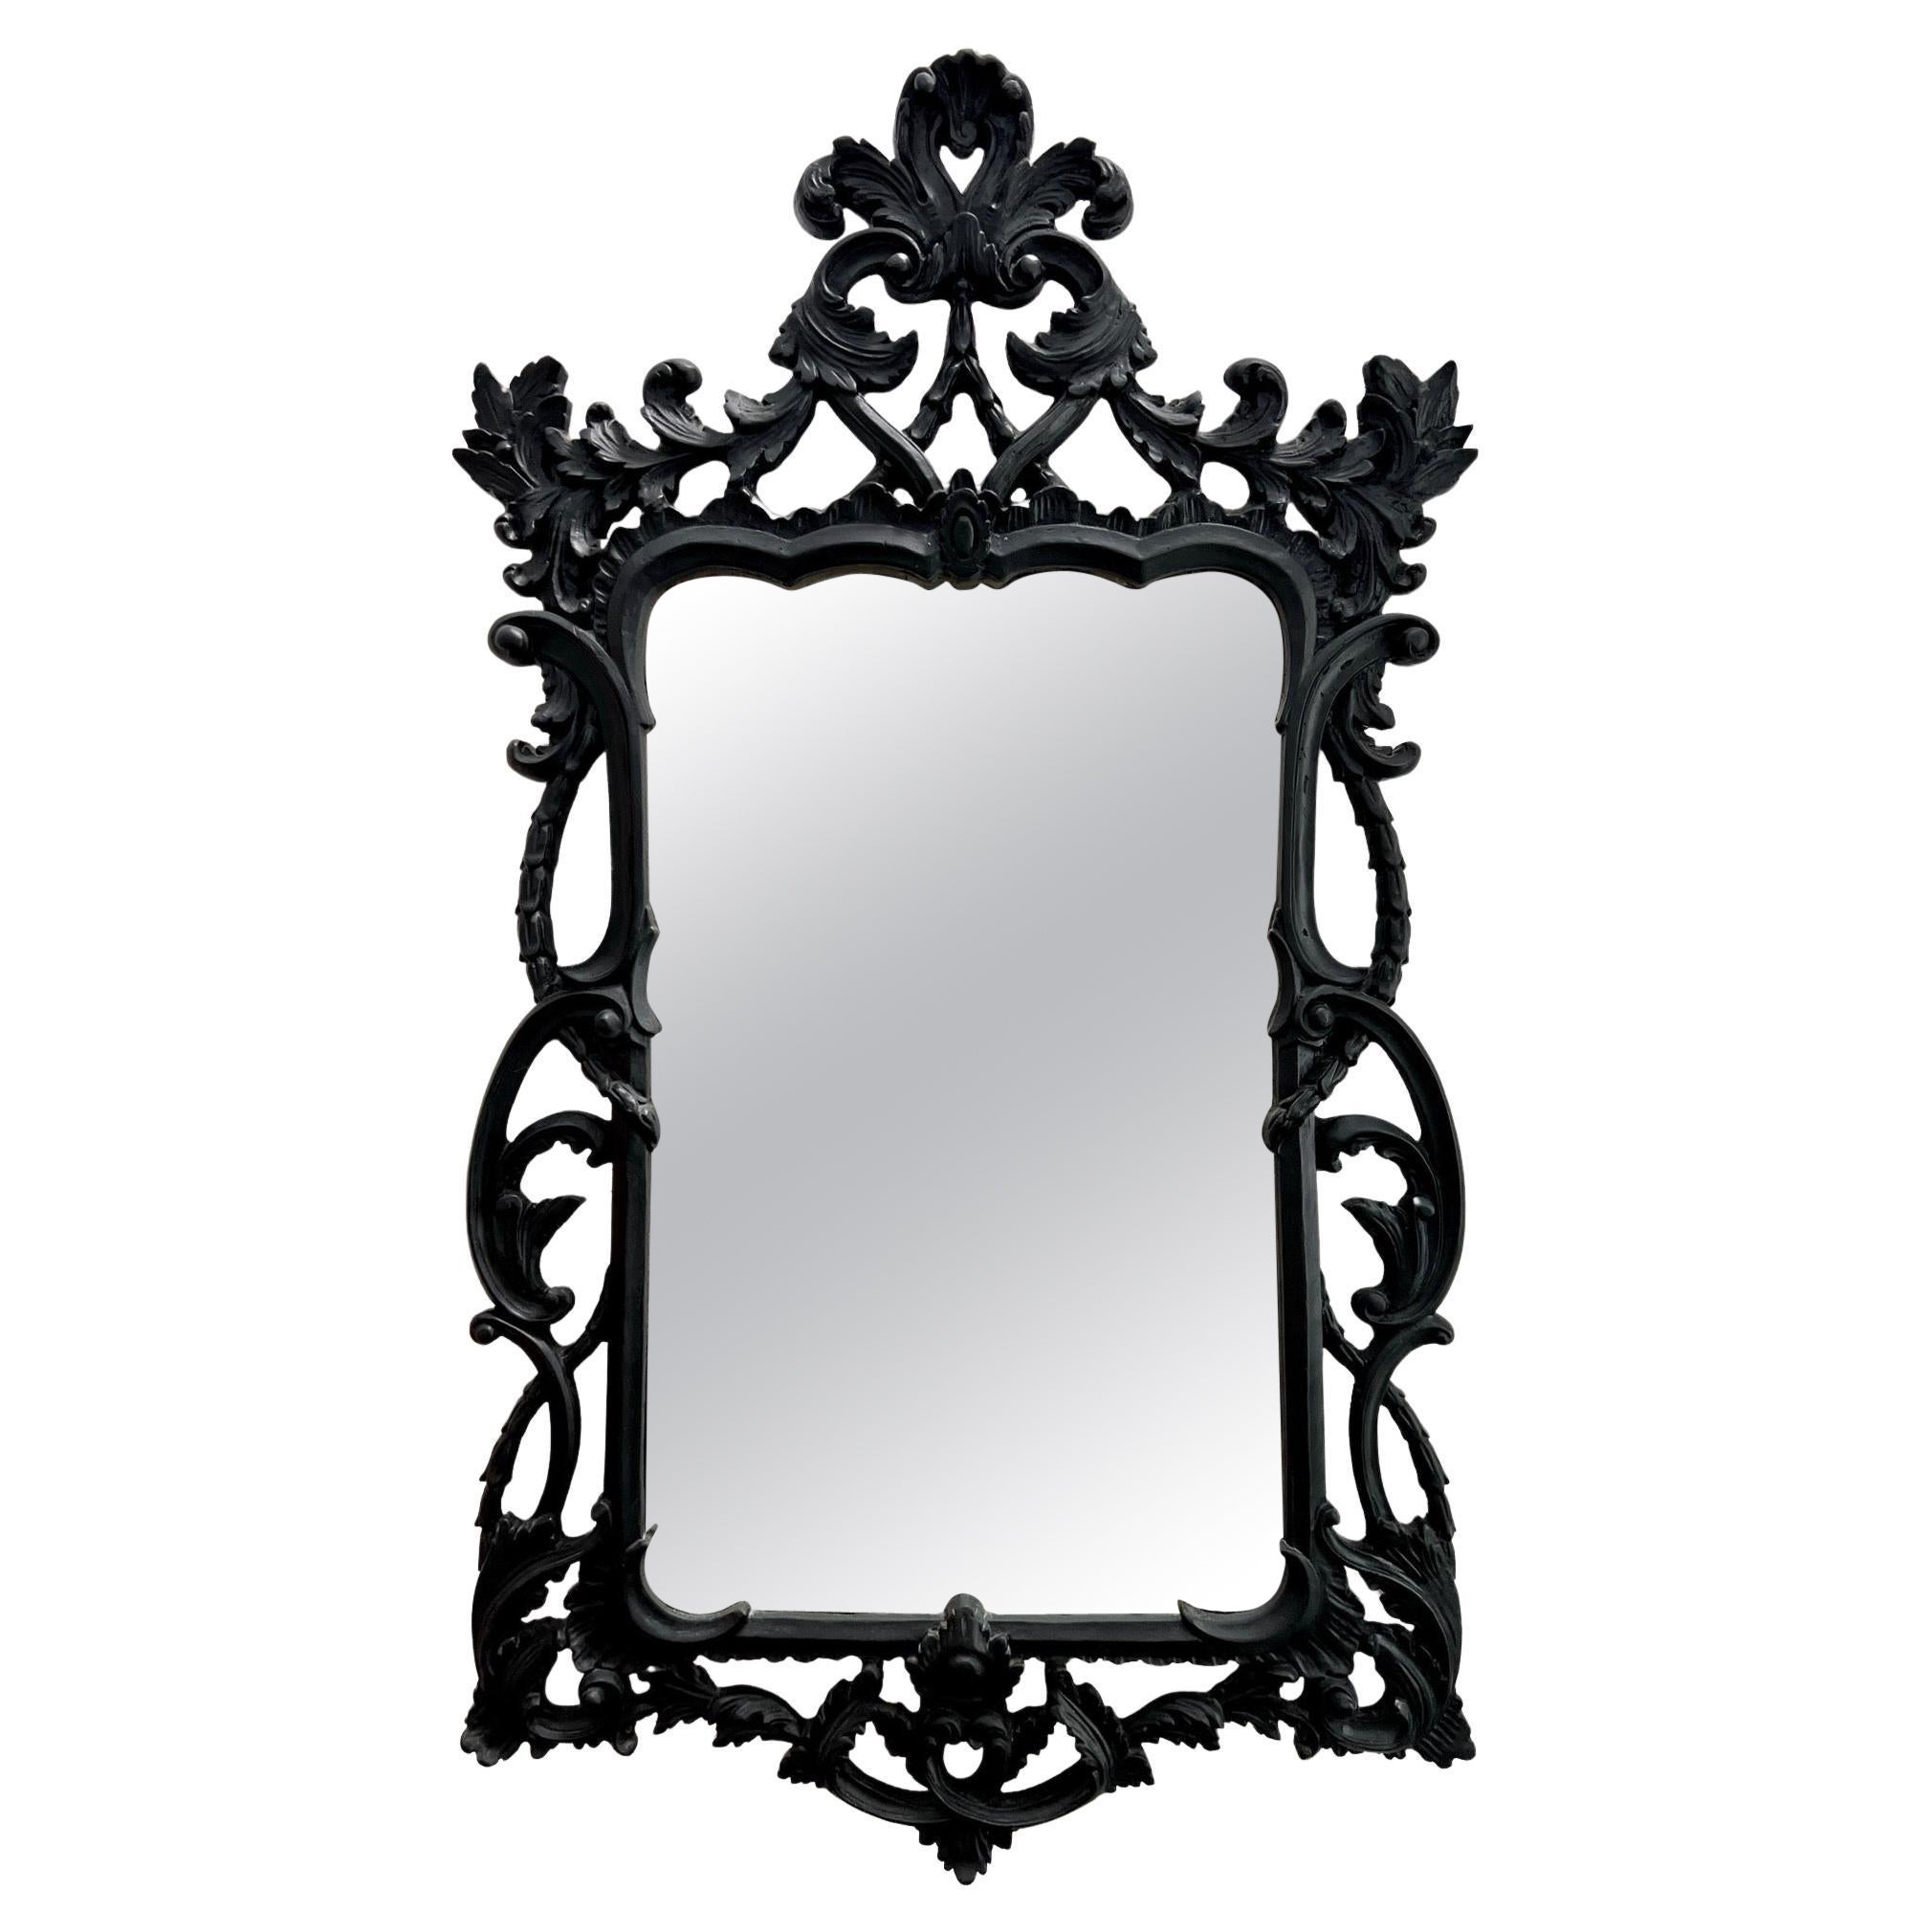 Hollywood Regency Black Carved Wood Mirror with Rococo Frame, Italy C. 1970's For Sale